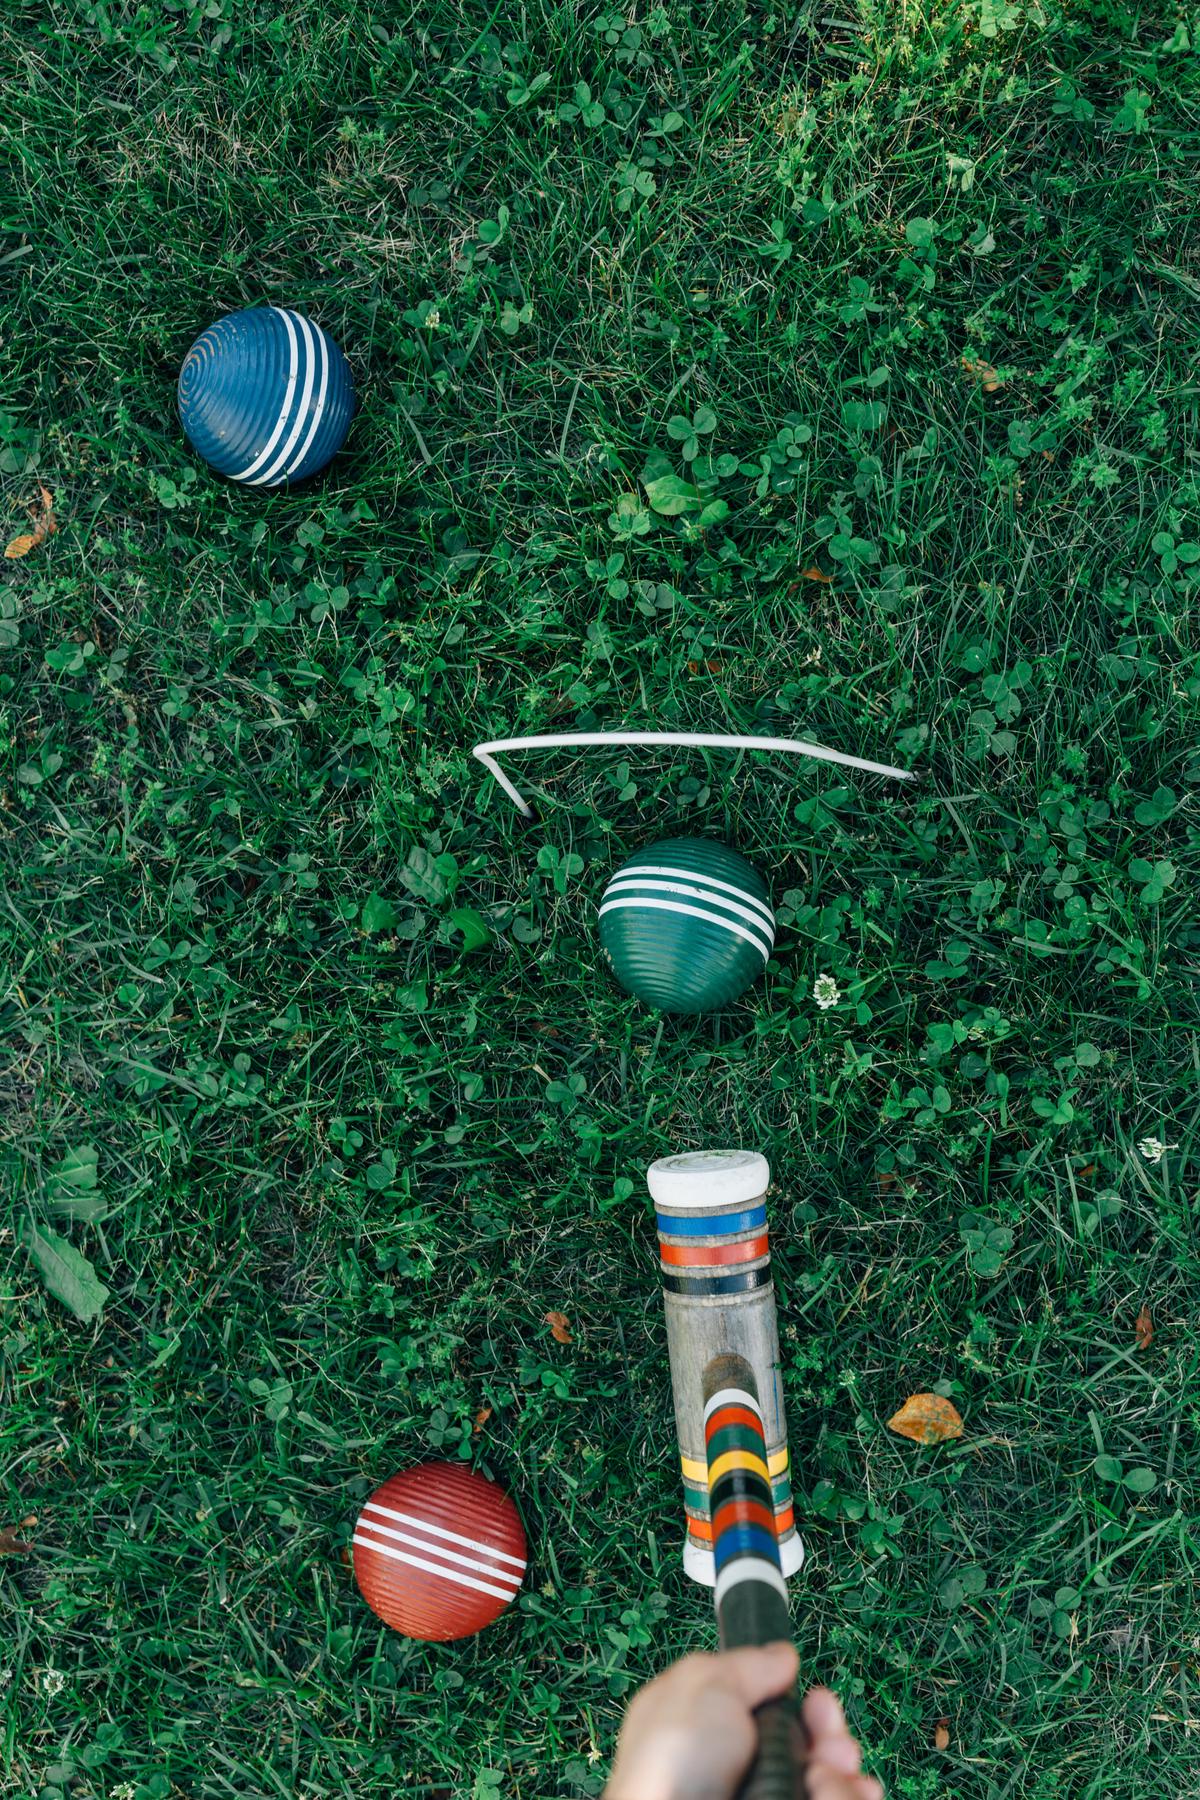 Image of a person playing croquet in a garden